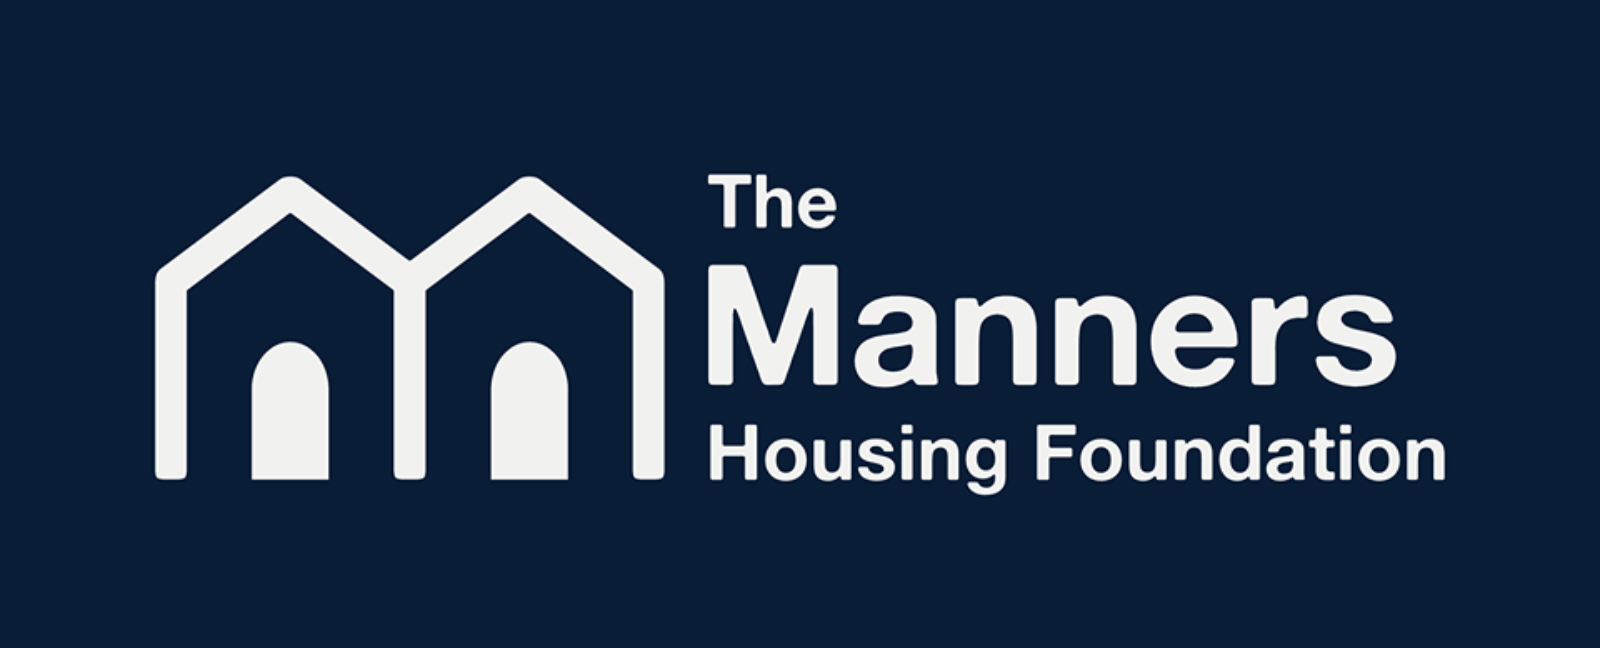 The Manners Housing Foundation